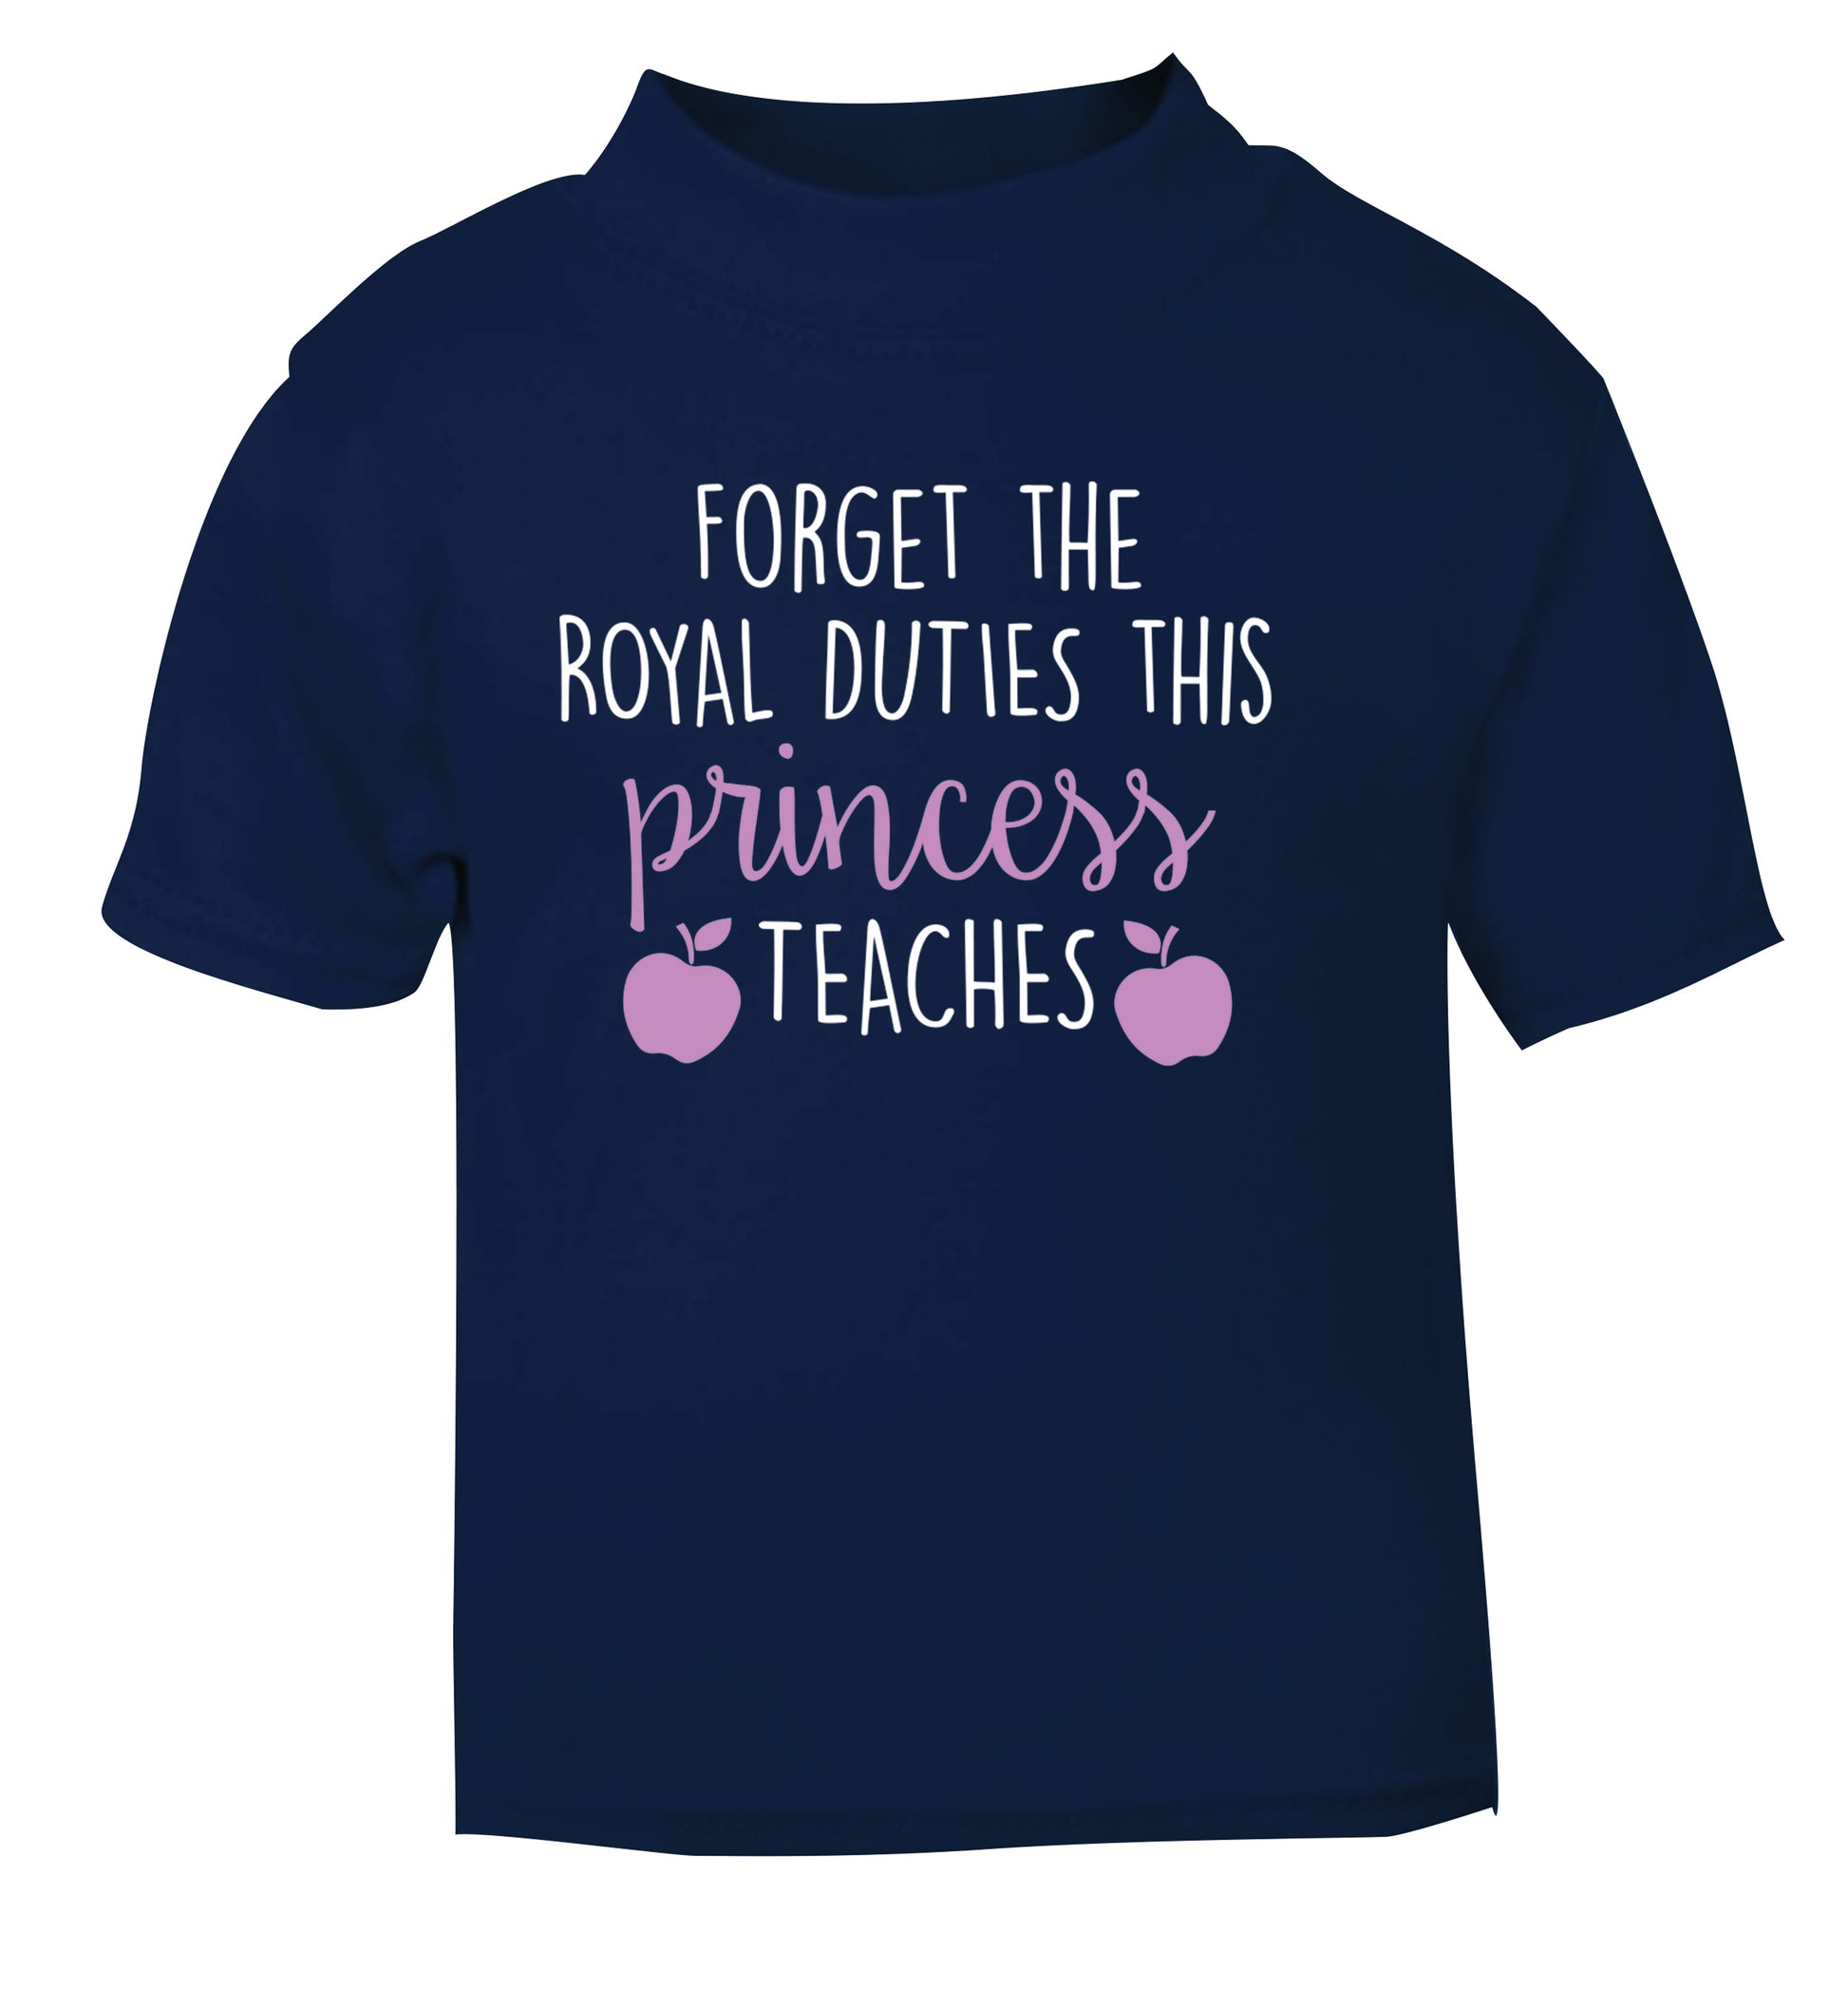 Forget the royal duties this princess teaches navy Baby Toddler Tshirt 2 Years